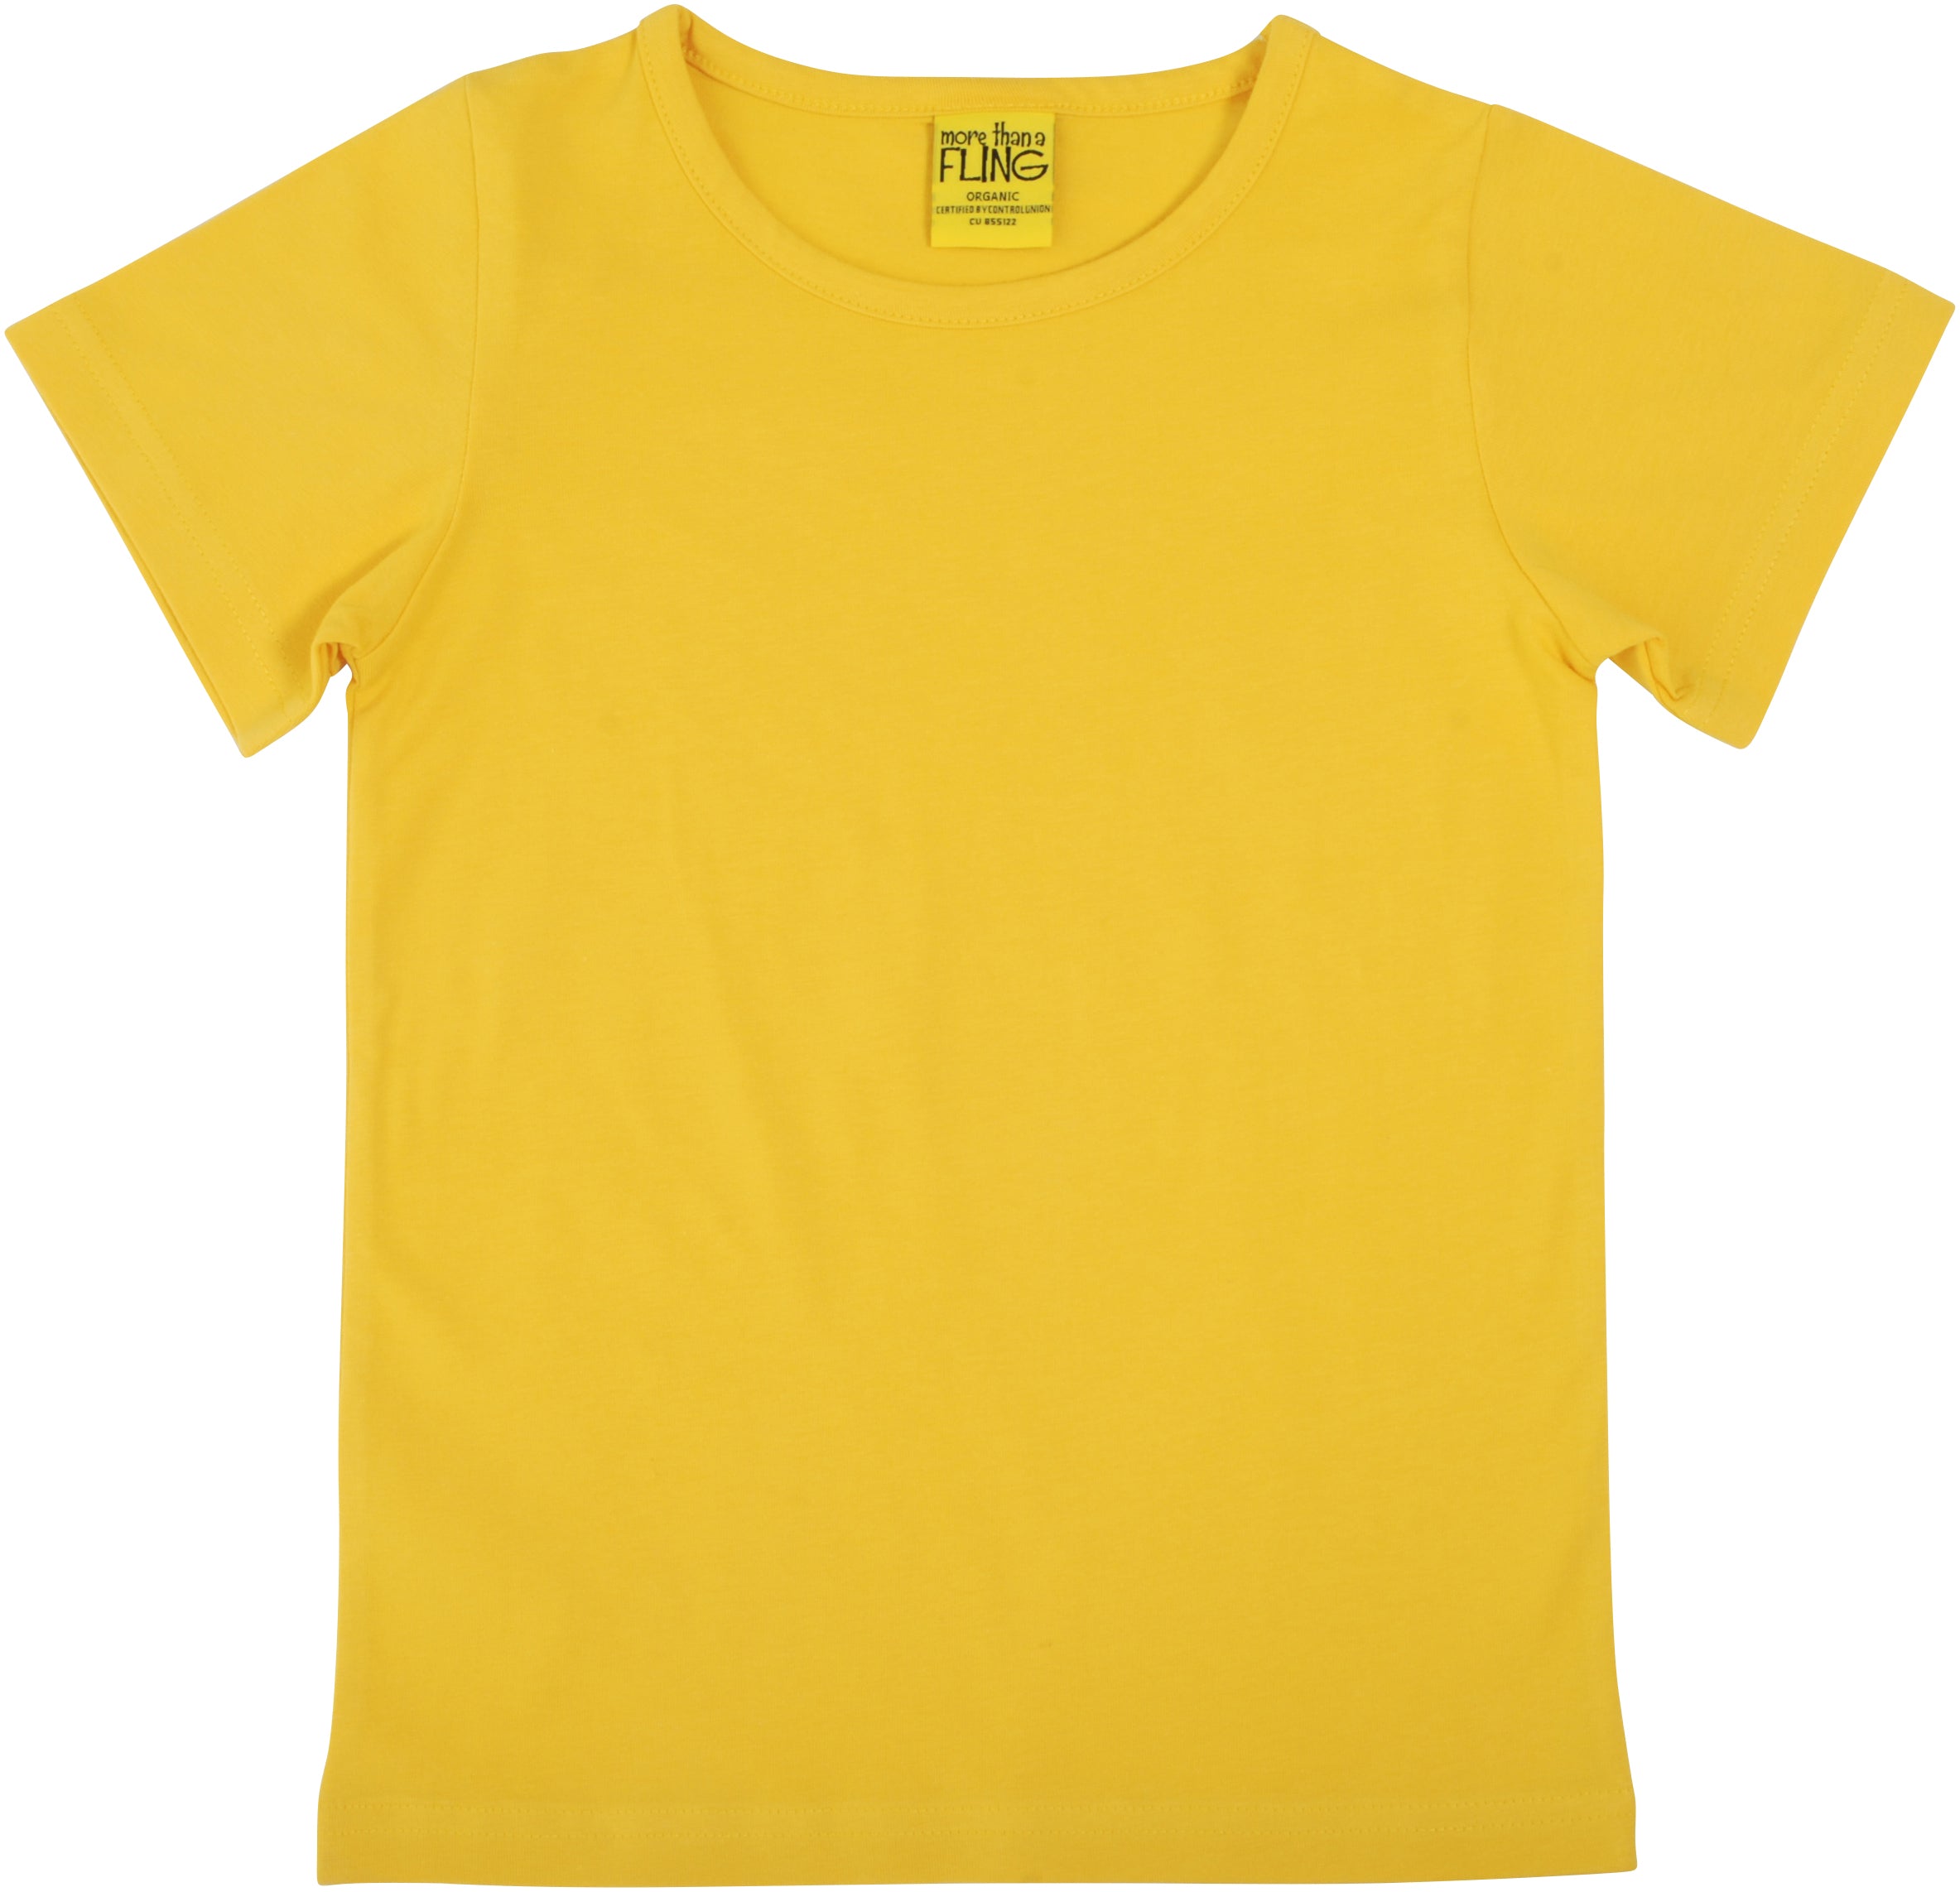 More Than A Fling - SS Tee - Warm Yellow ** LAST SIZE 98/104cm